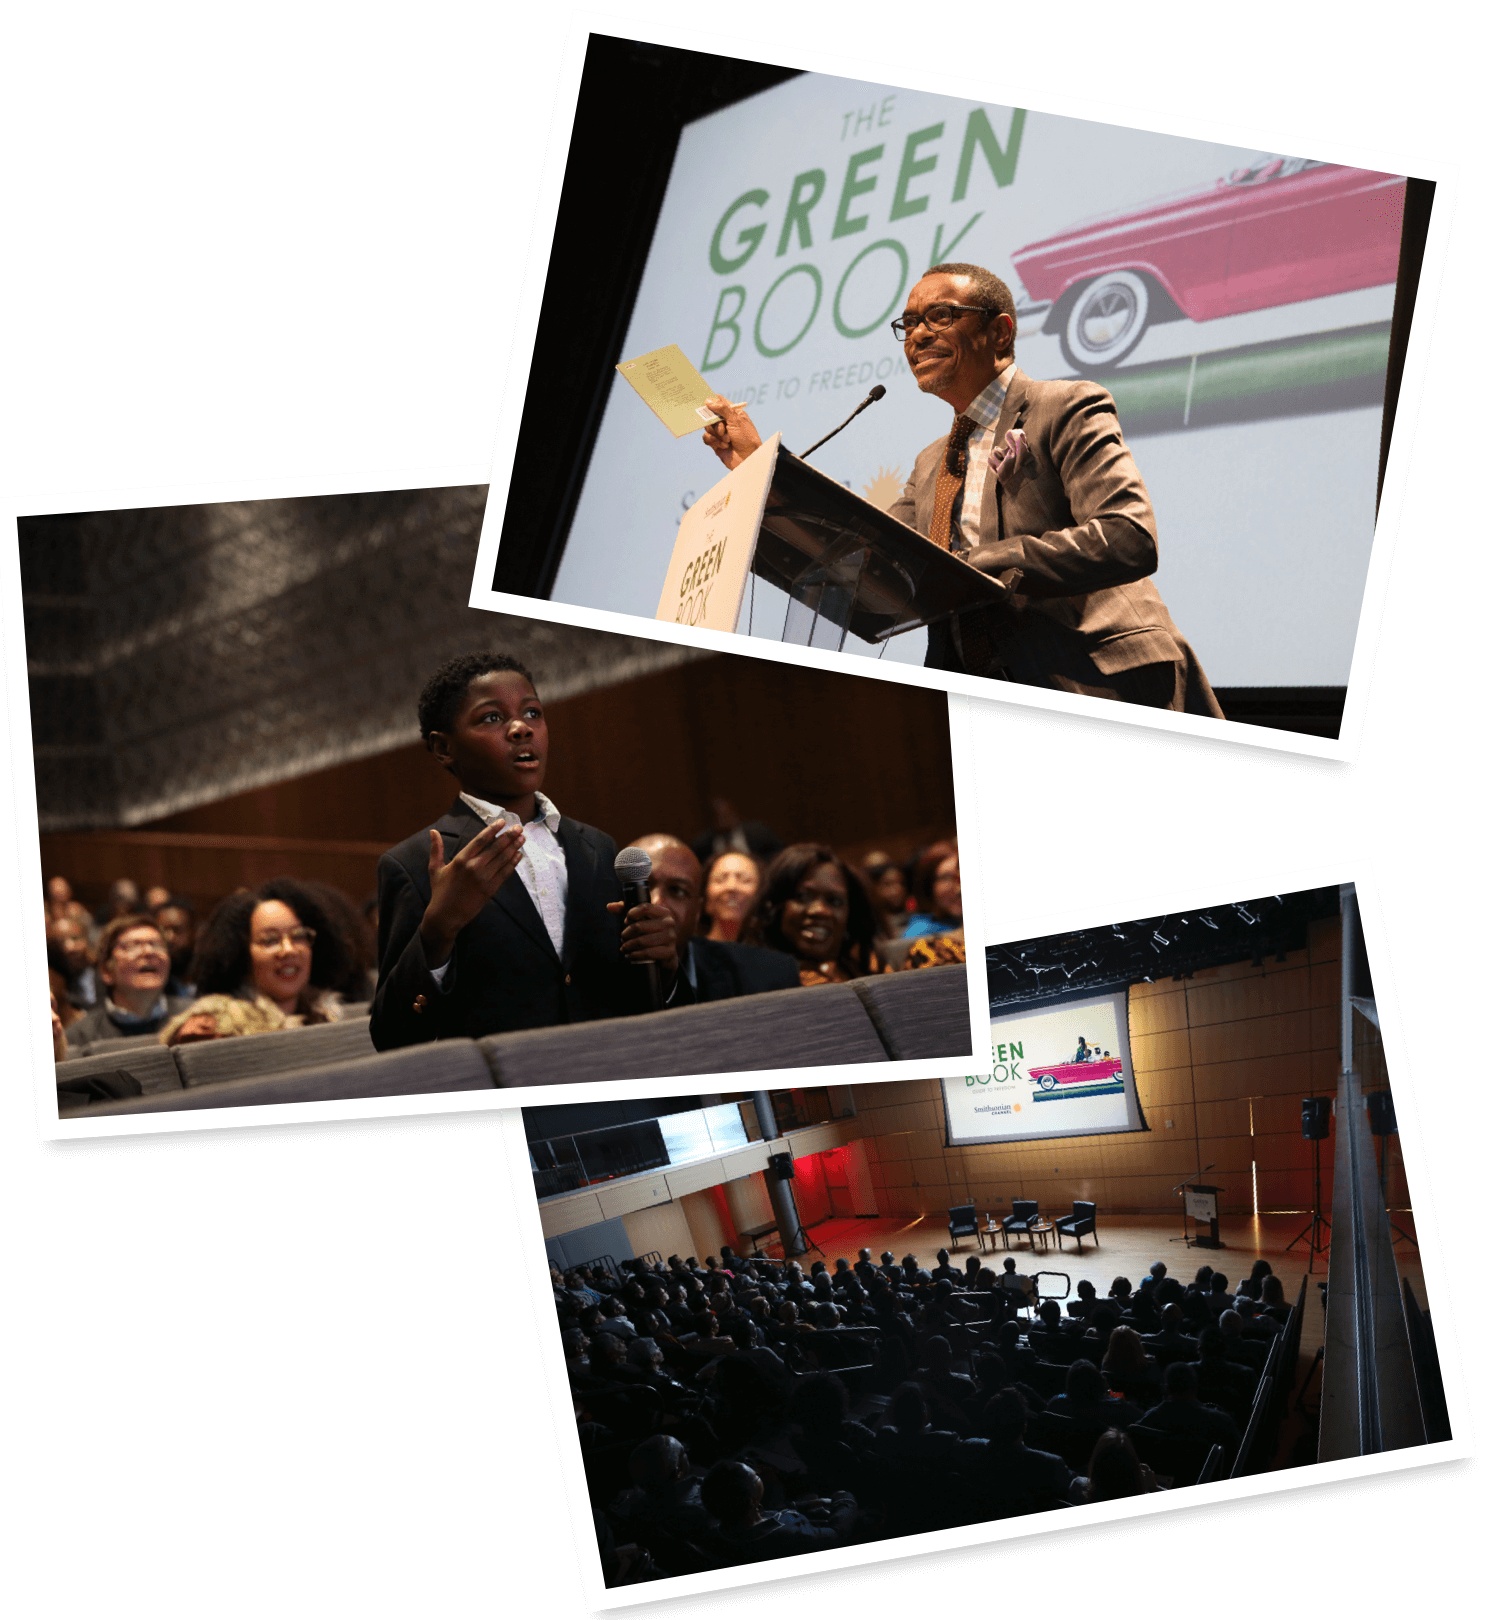 The Green Book photo collage